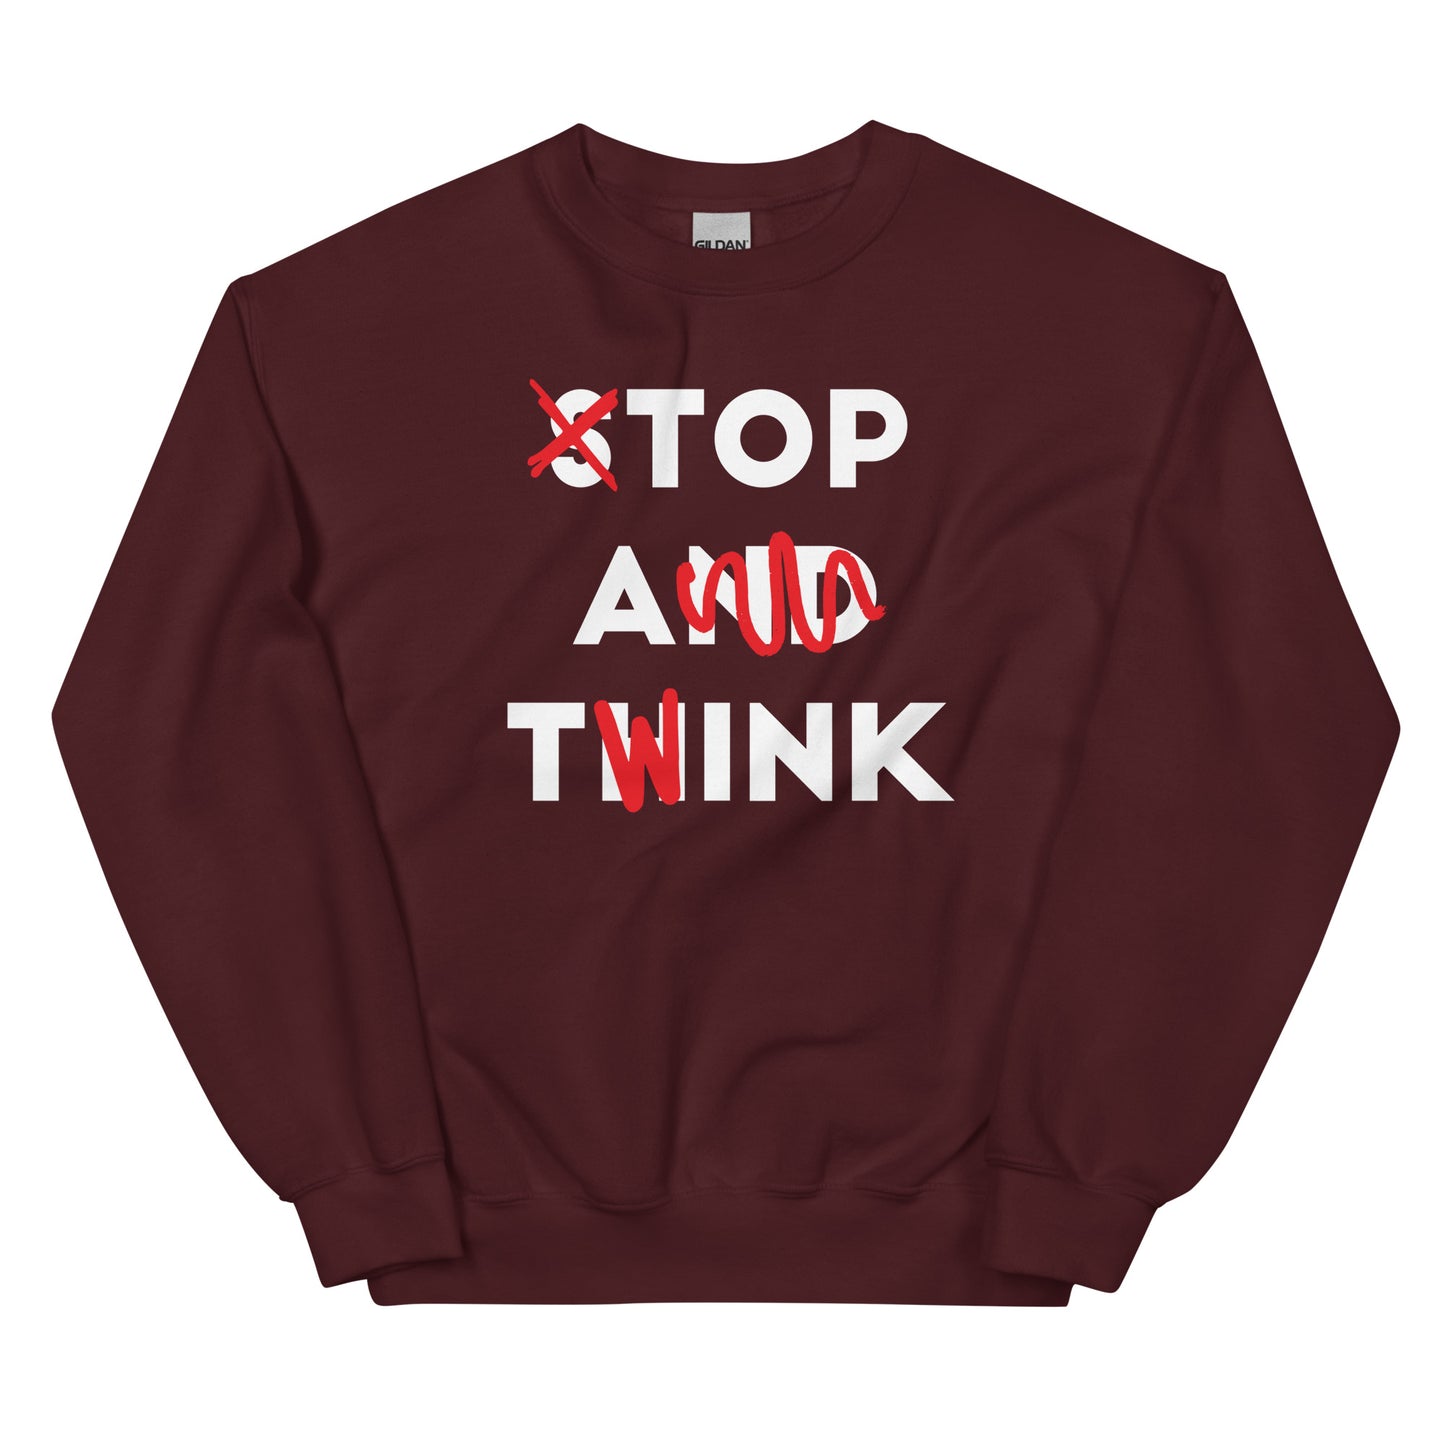 Top a Twink (Stop And Think) Unisex Sweatshirt